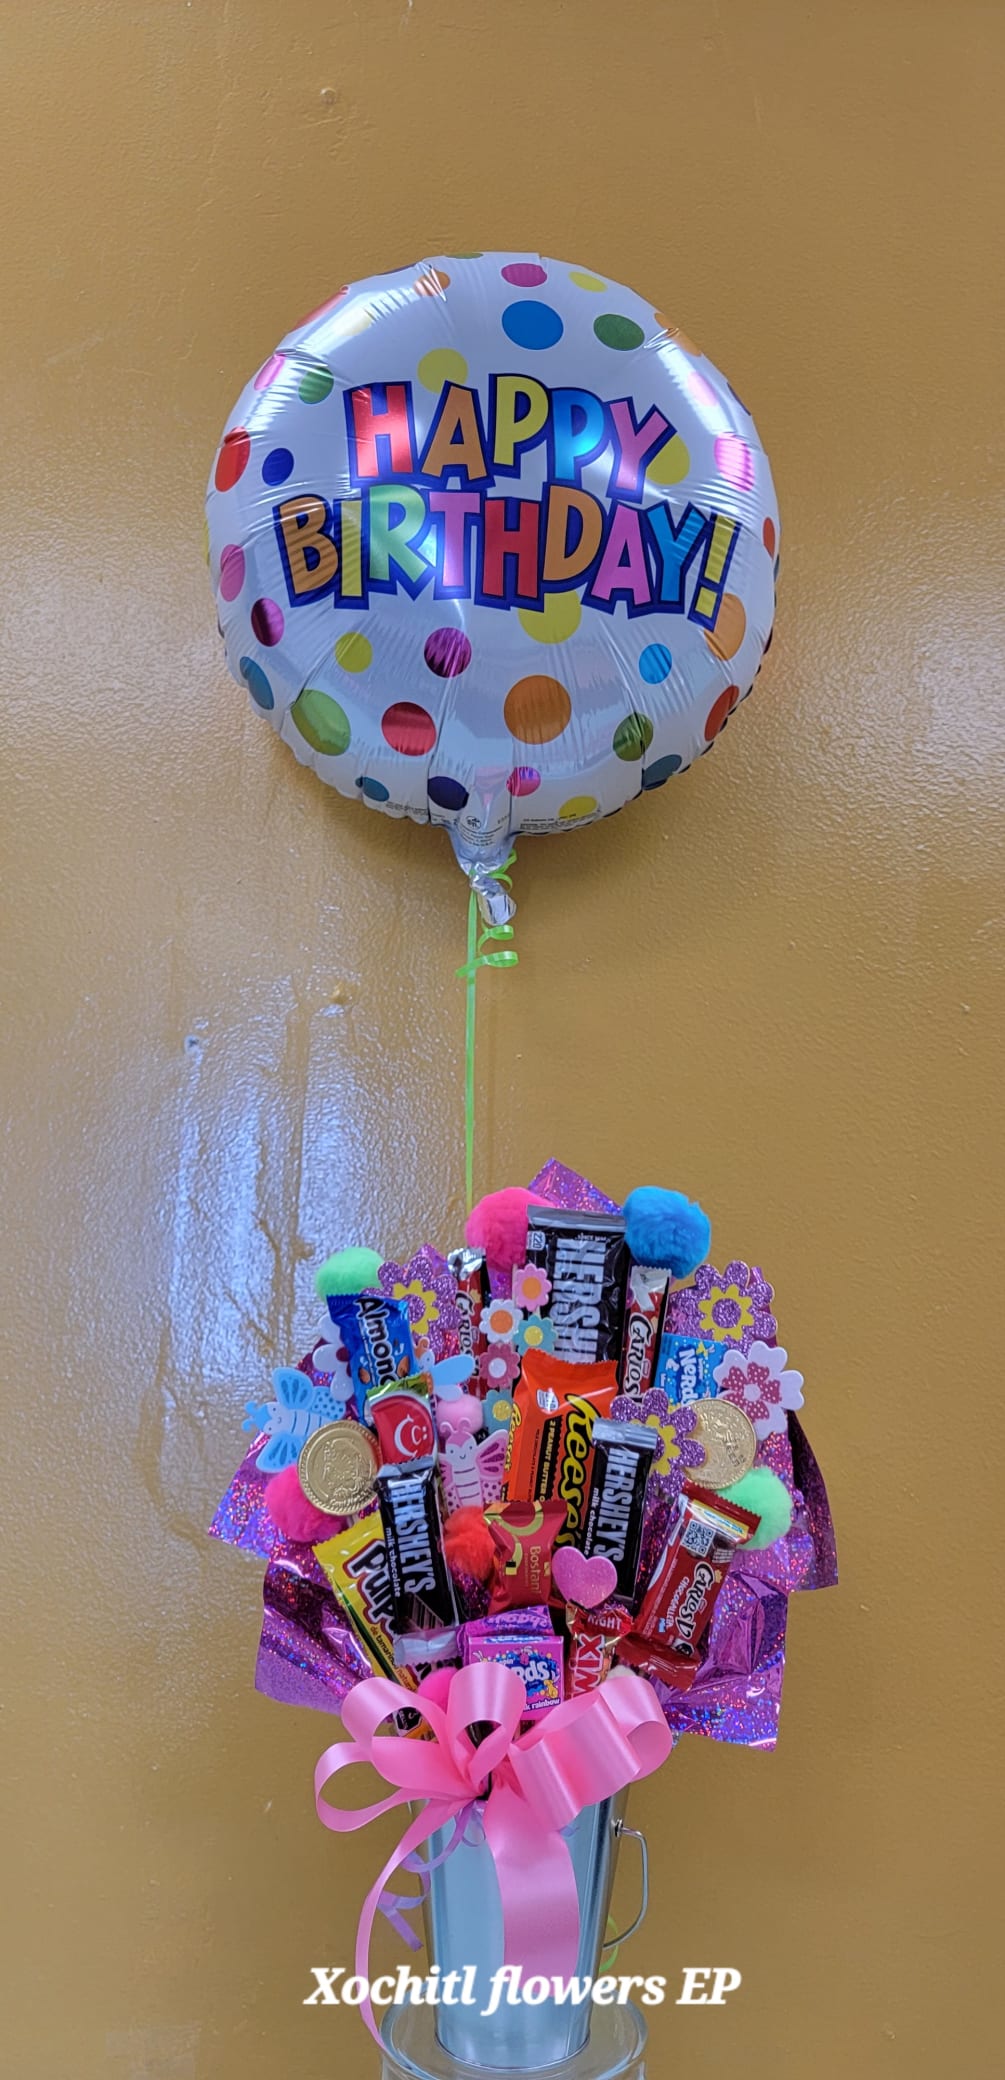 Mixture of candies decorated and a balloon